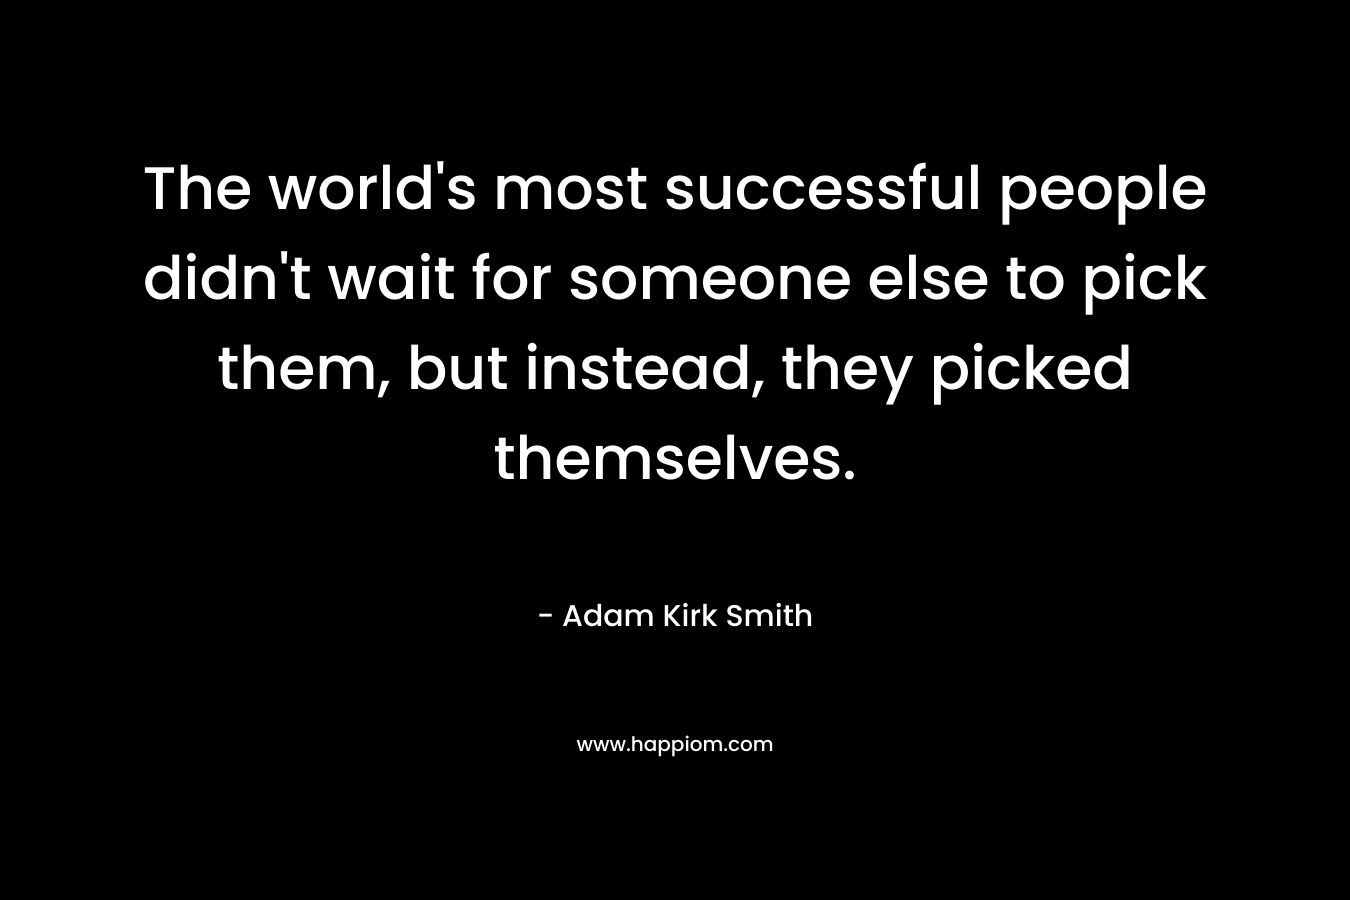 The world's most successful people didn't wait for someone else to pick them, but instead, they picked themselves.